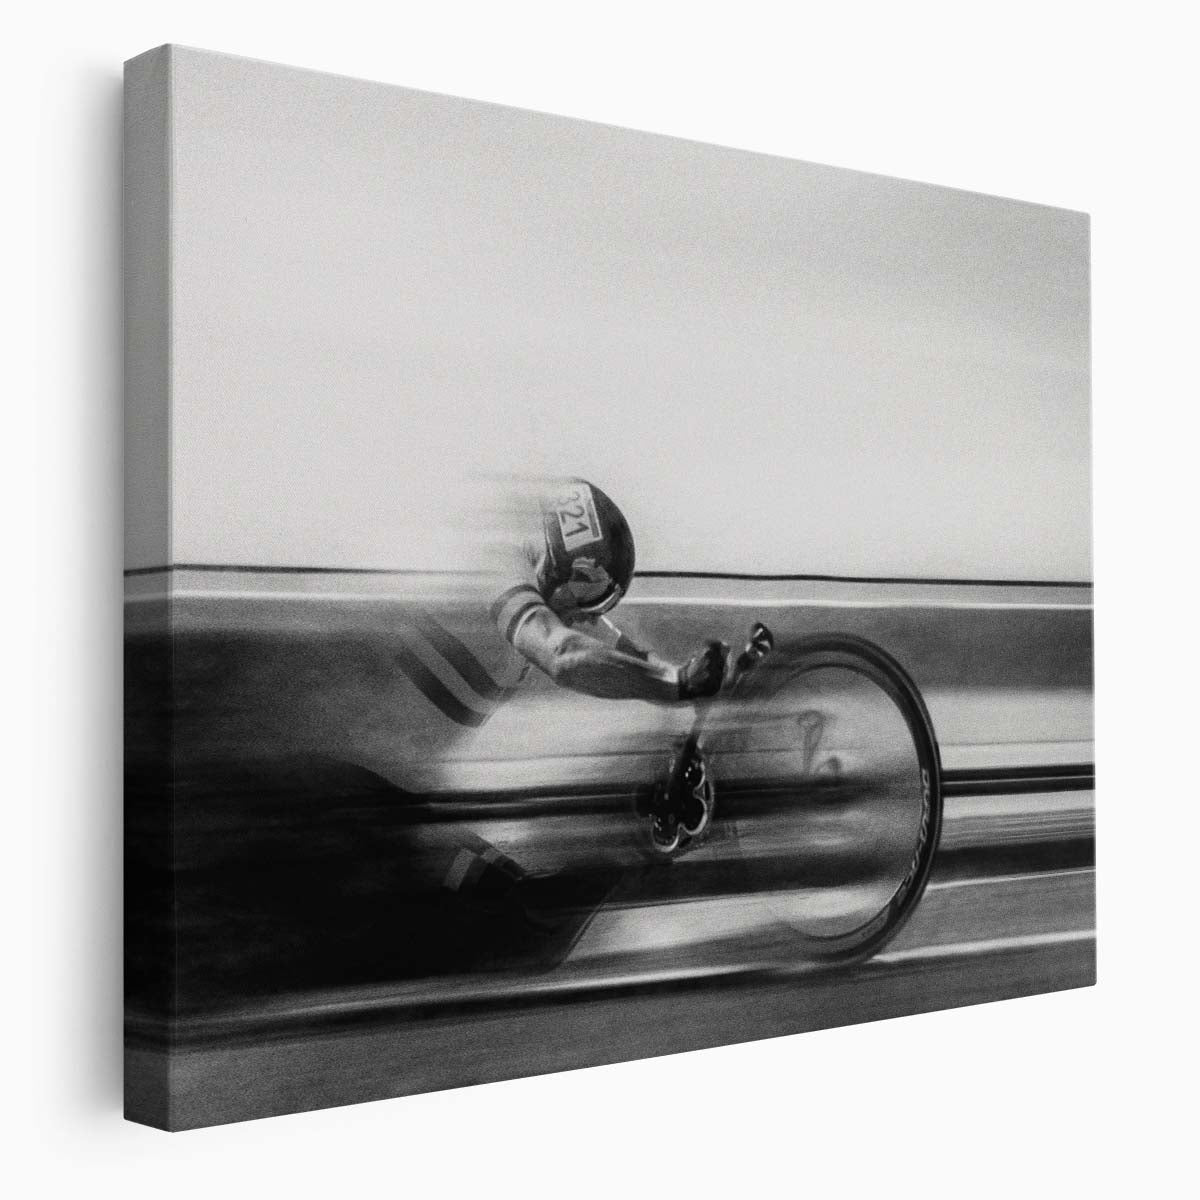 Speed Rush Monochrome Cycling Race Wall Art by Luxuriance Designs. Made in USA.